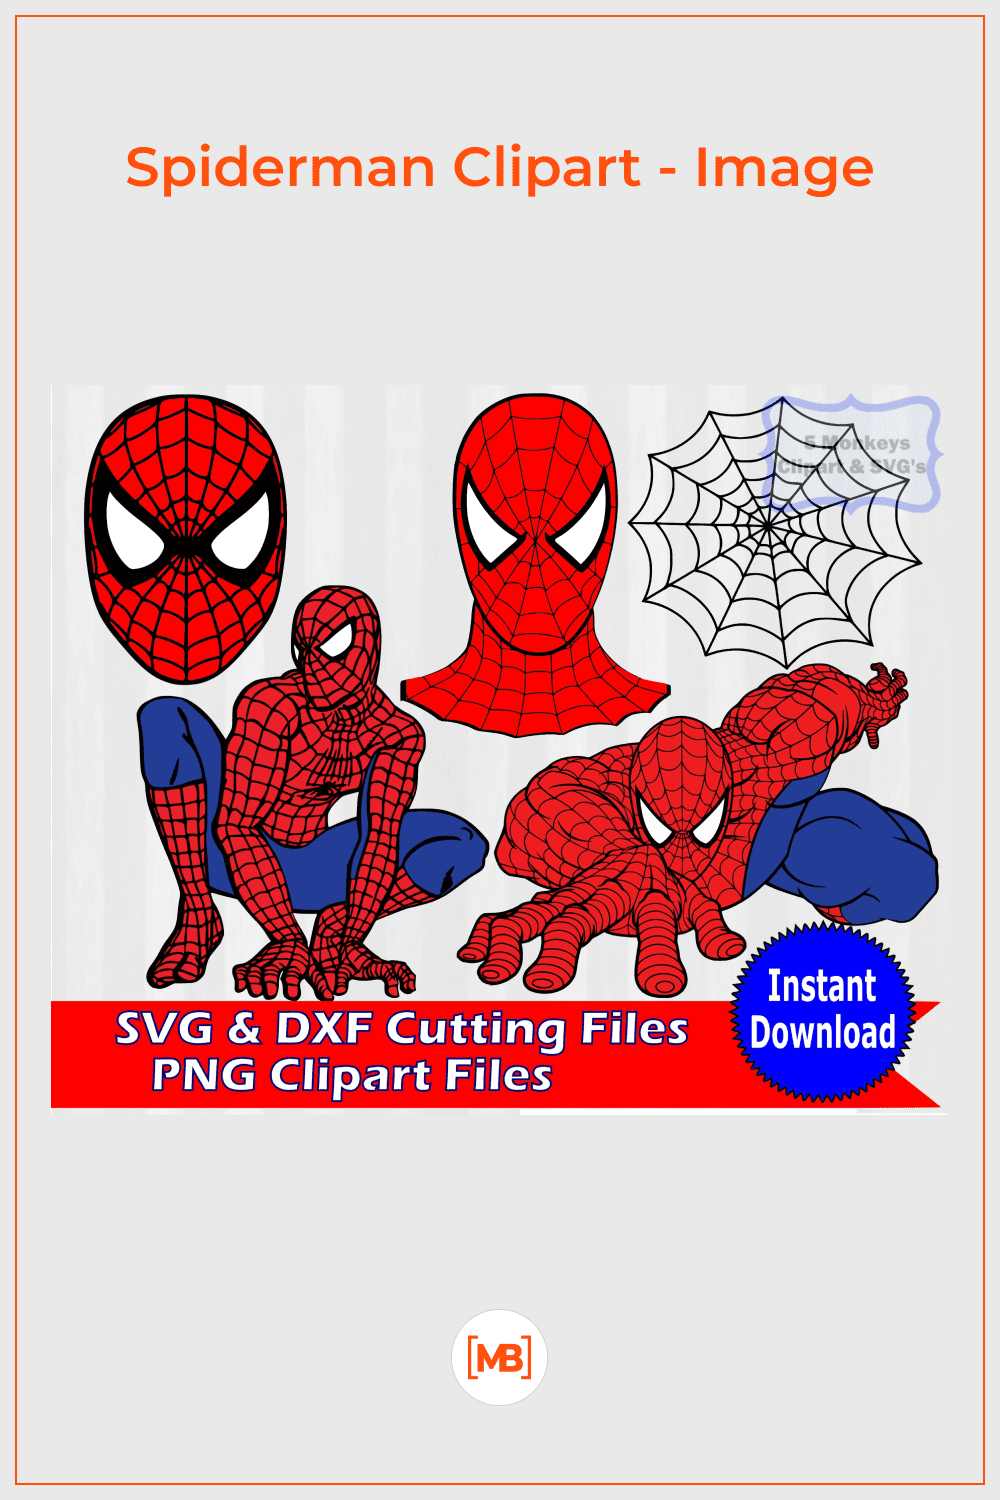 Spiderman Clipart - Image.